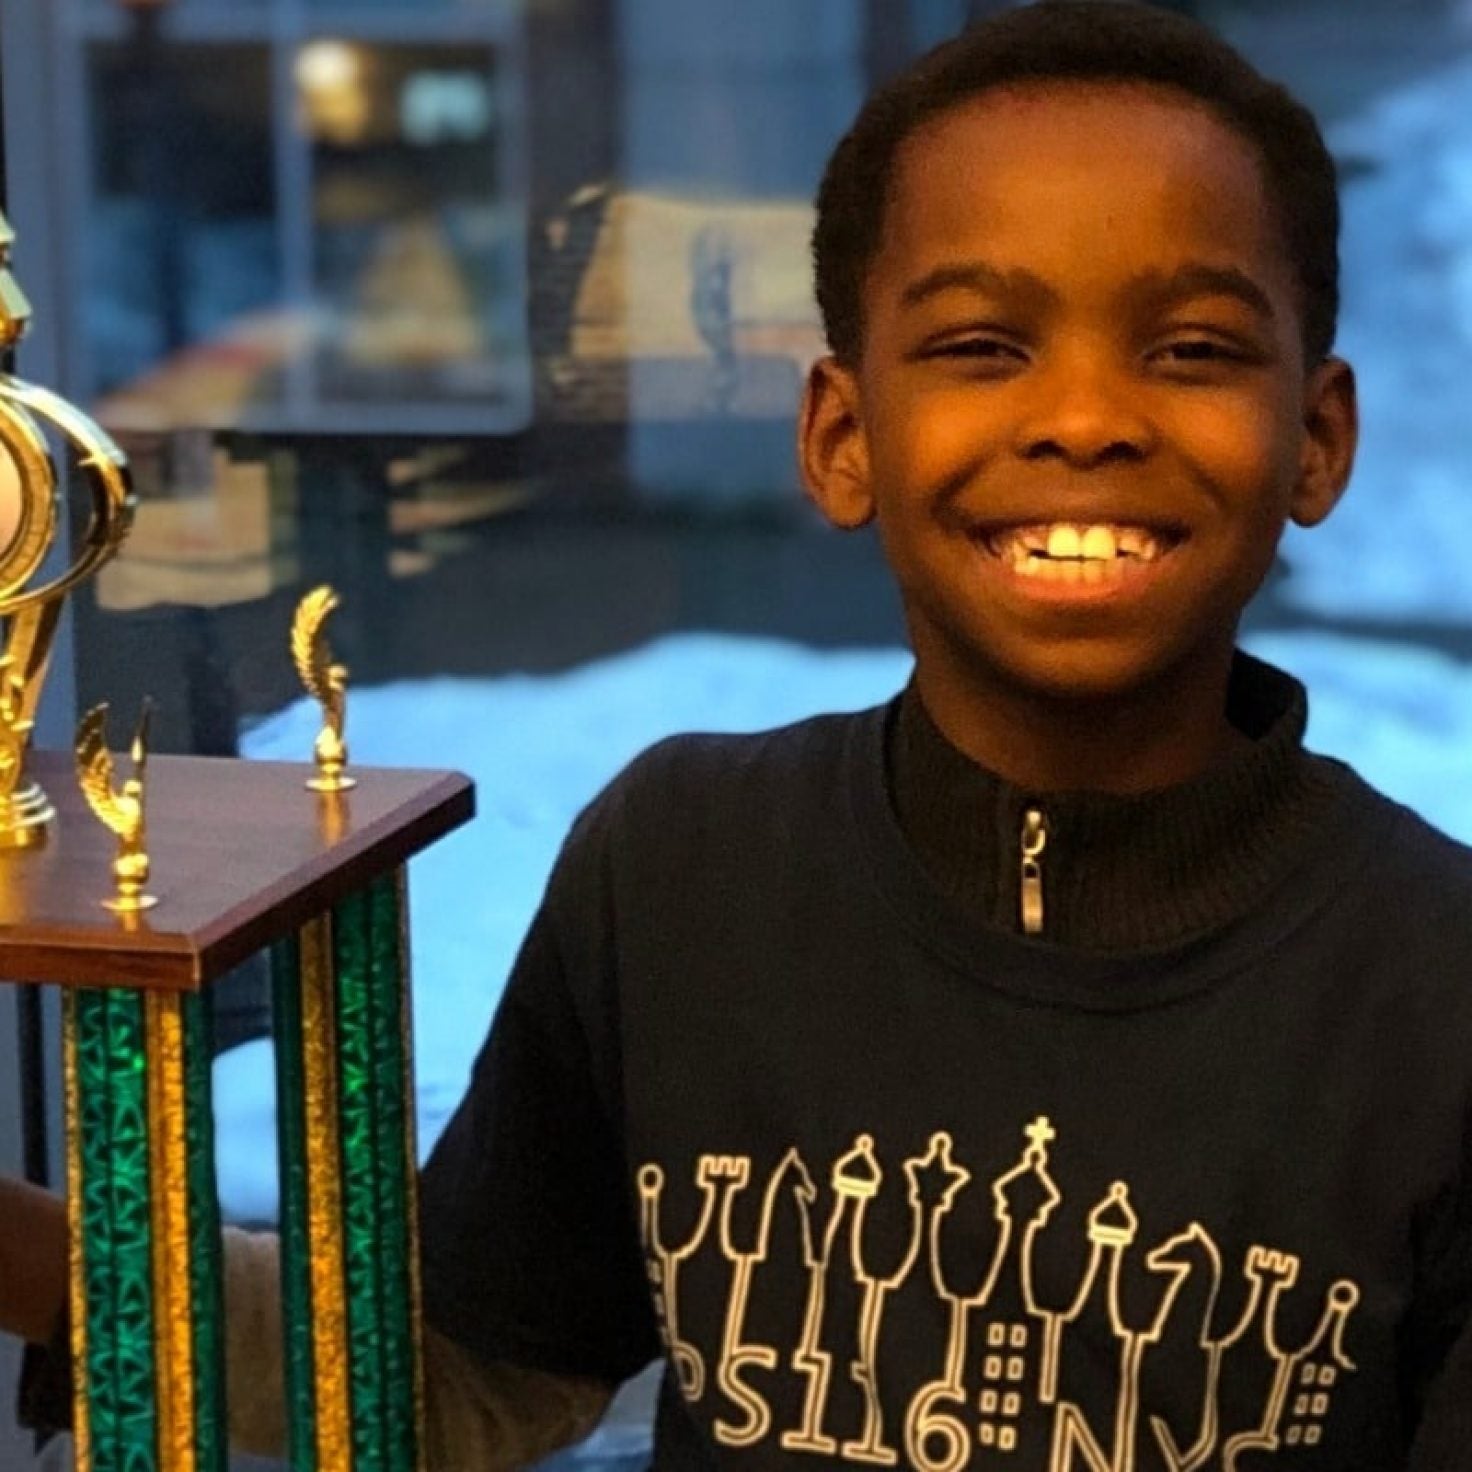 Homeless 8-Year-Old Nigerian Refugee Receives More Than $100,000 In Donations After Winning New York State Chess Championship